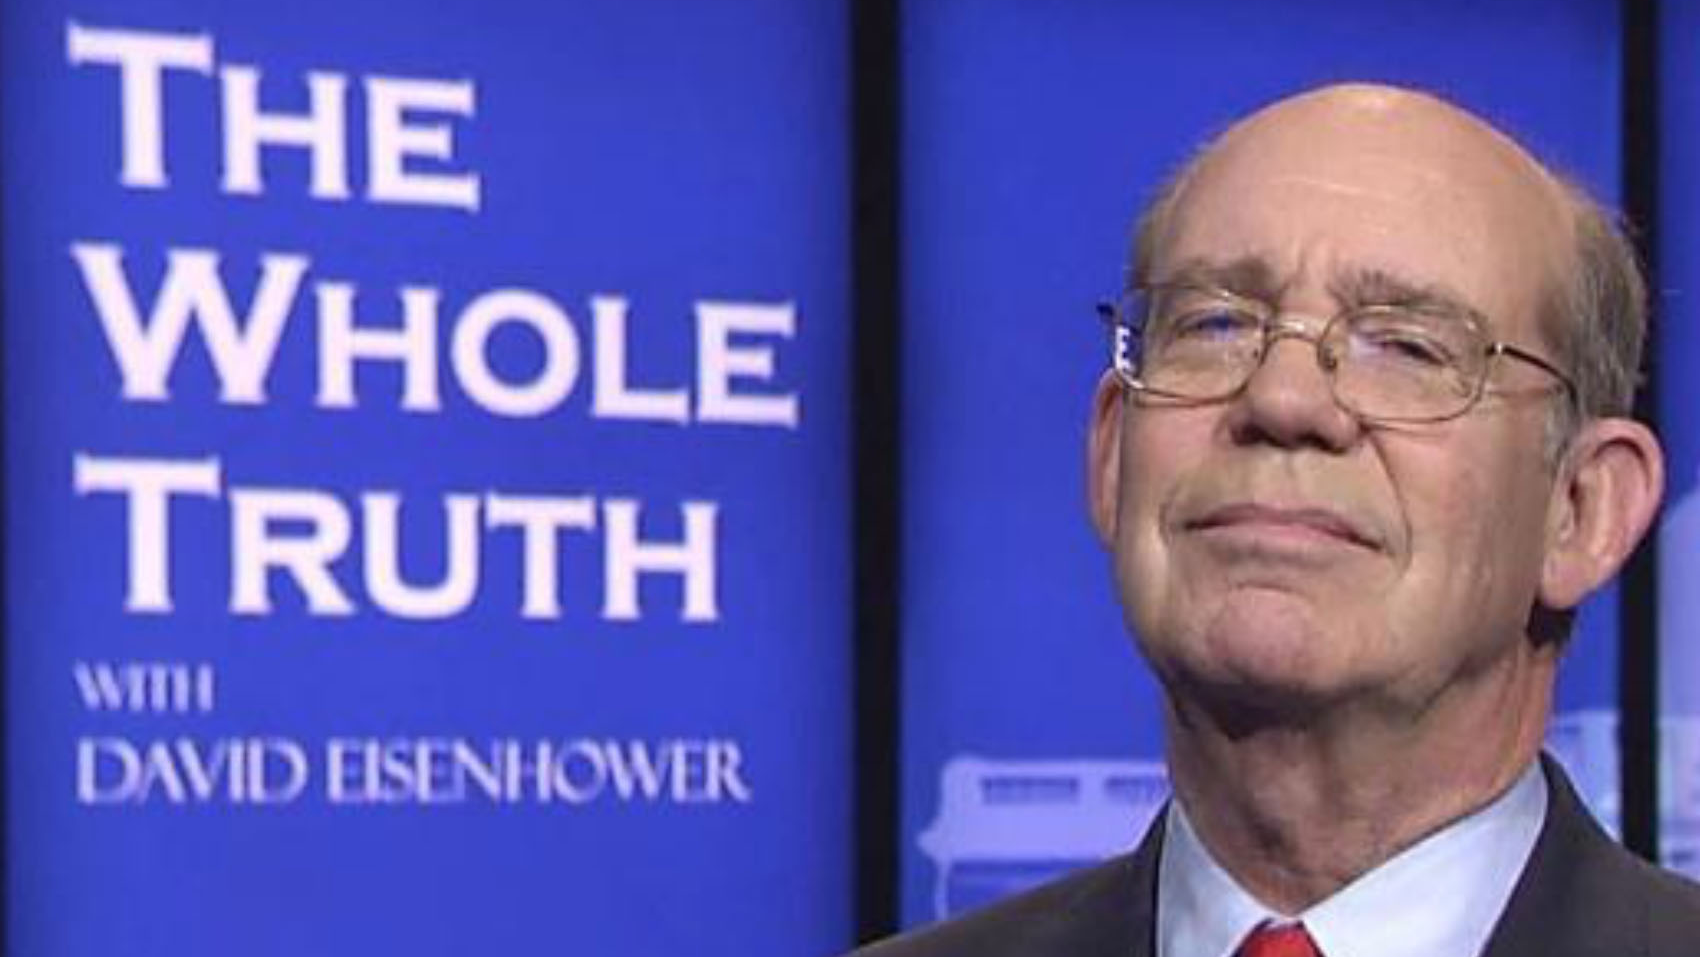 David Eisenhower, Pulitzer-nominated author, scholar, and grandson of President Dwight D. Eisenhower, is back with a deep dive into socially and politically important issues in a new season of “The Whole Truth with David Eisenhower.”